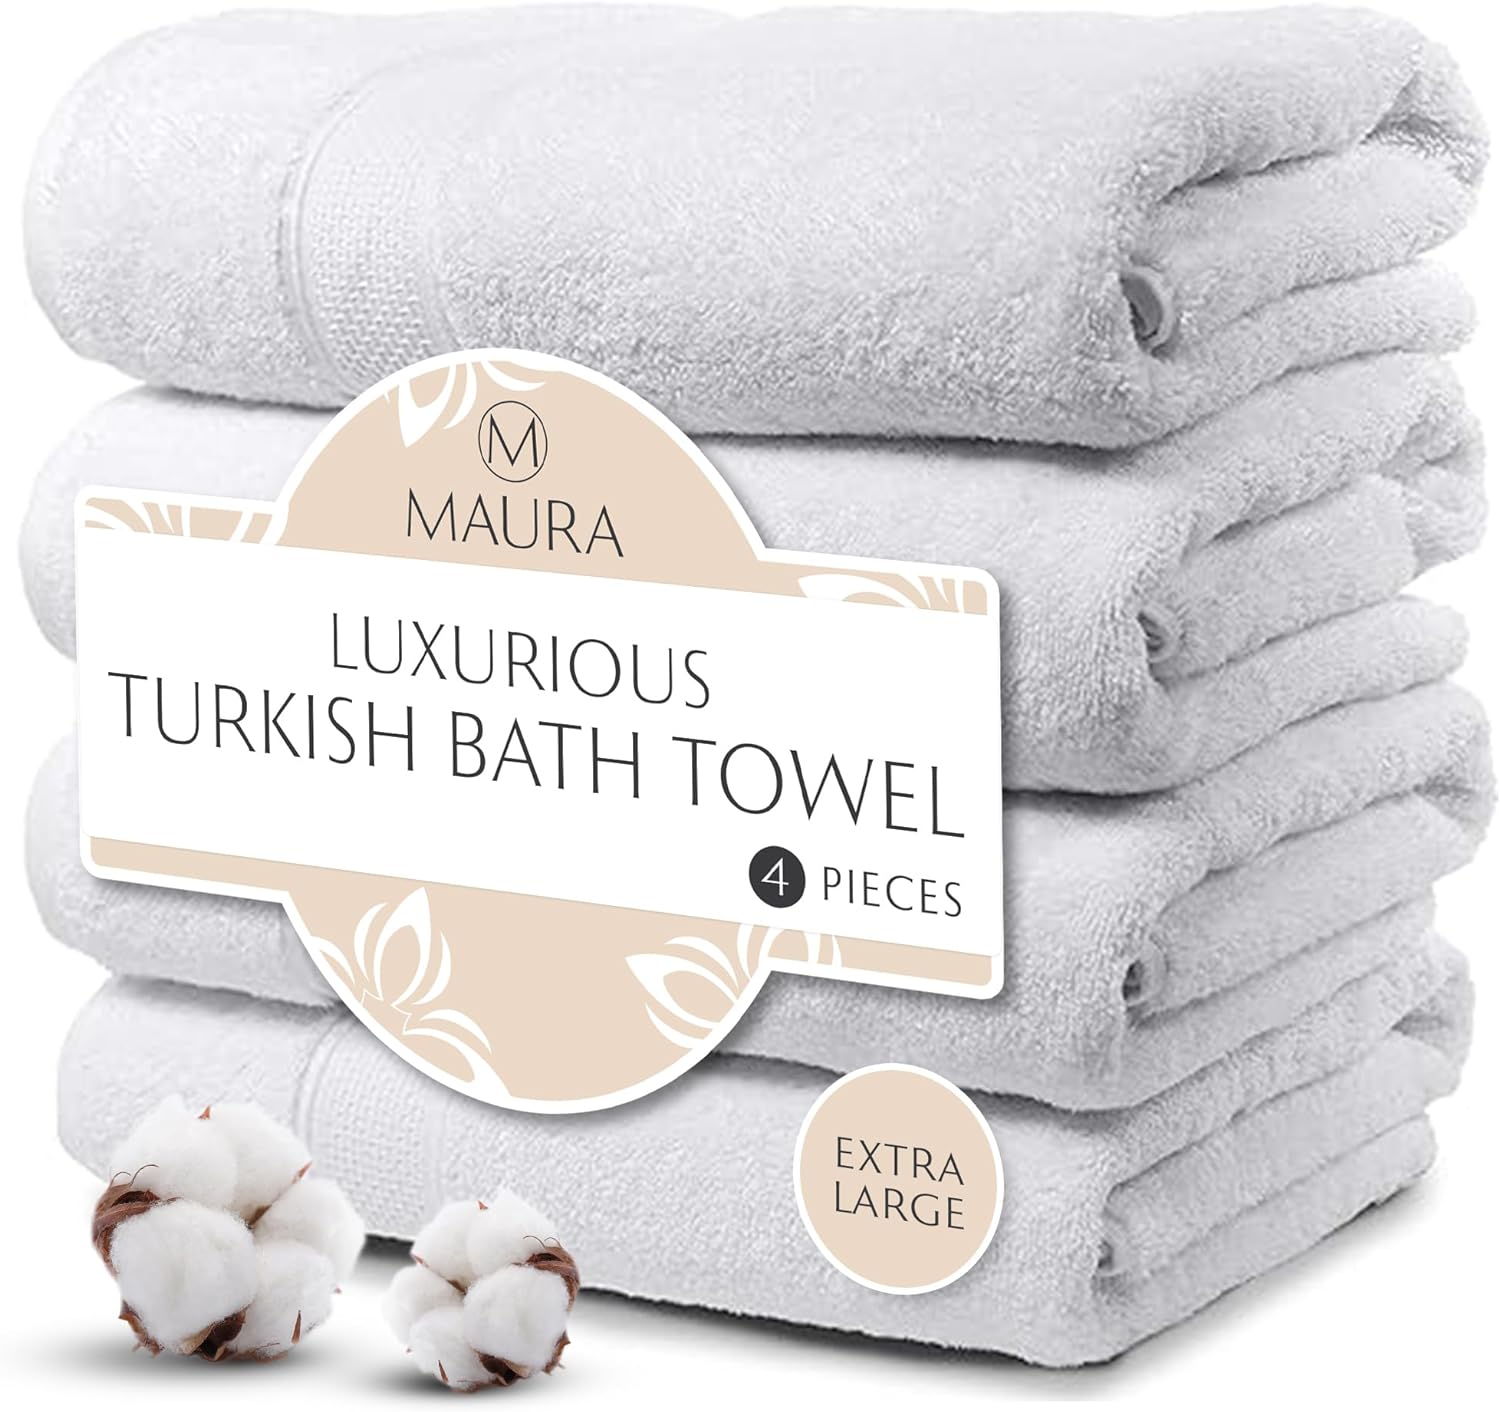 The Best Luxury Towels That Will Make Your Bathroom Feel Like a Spa